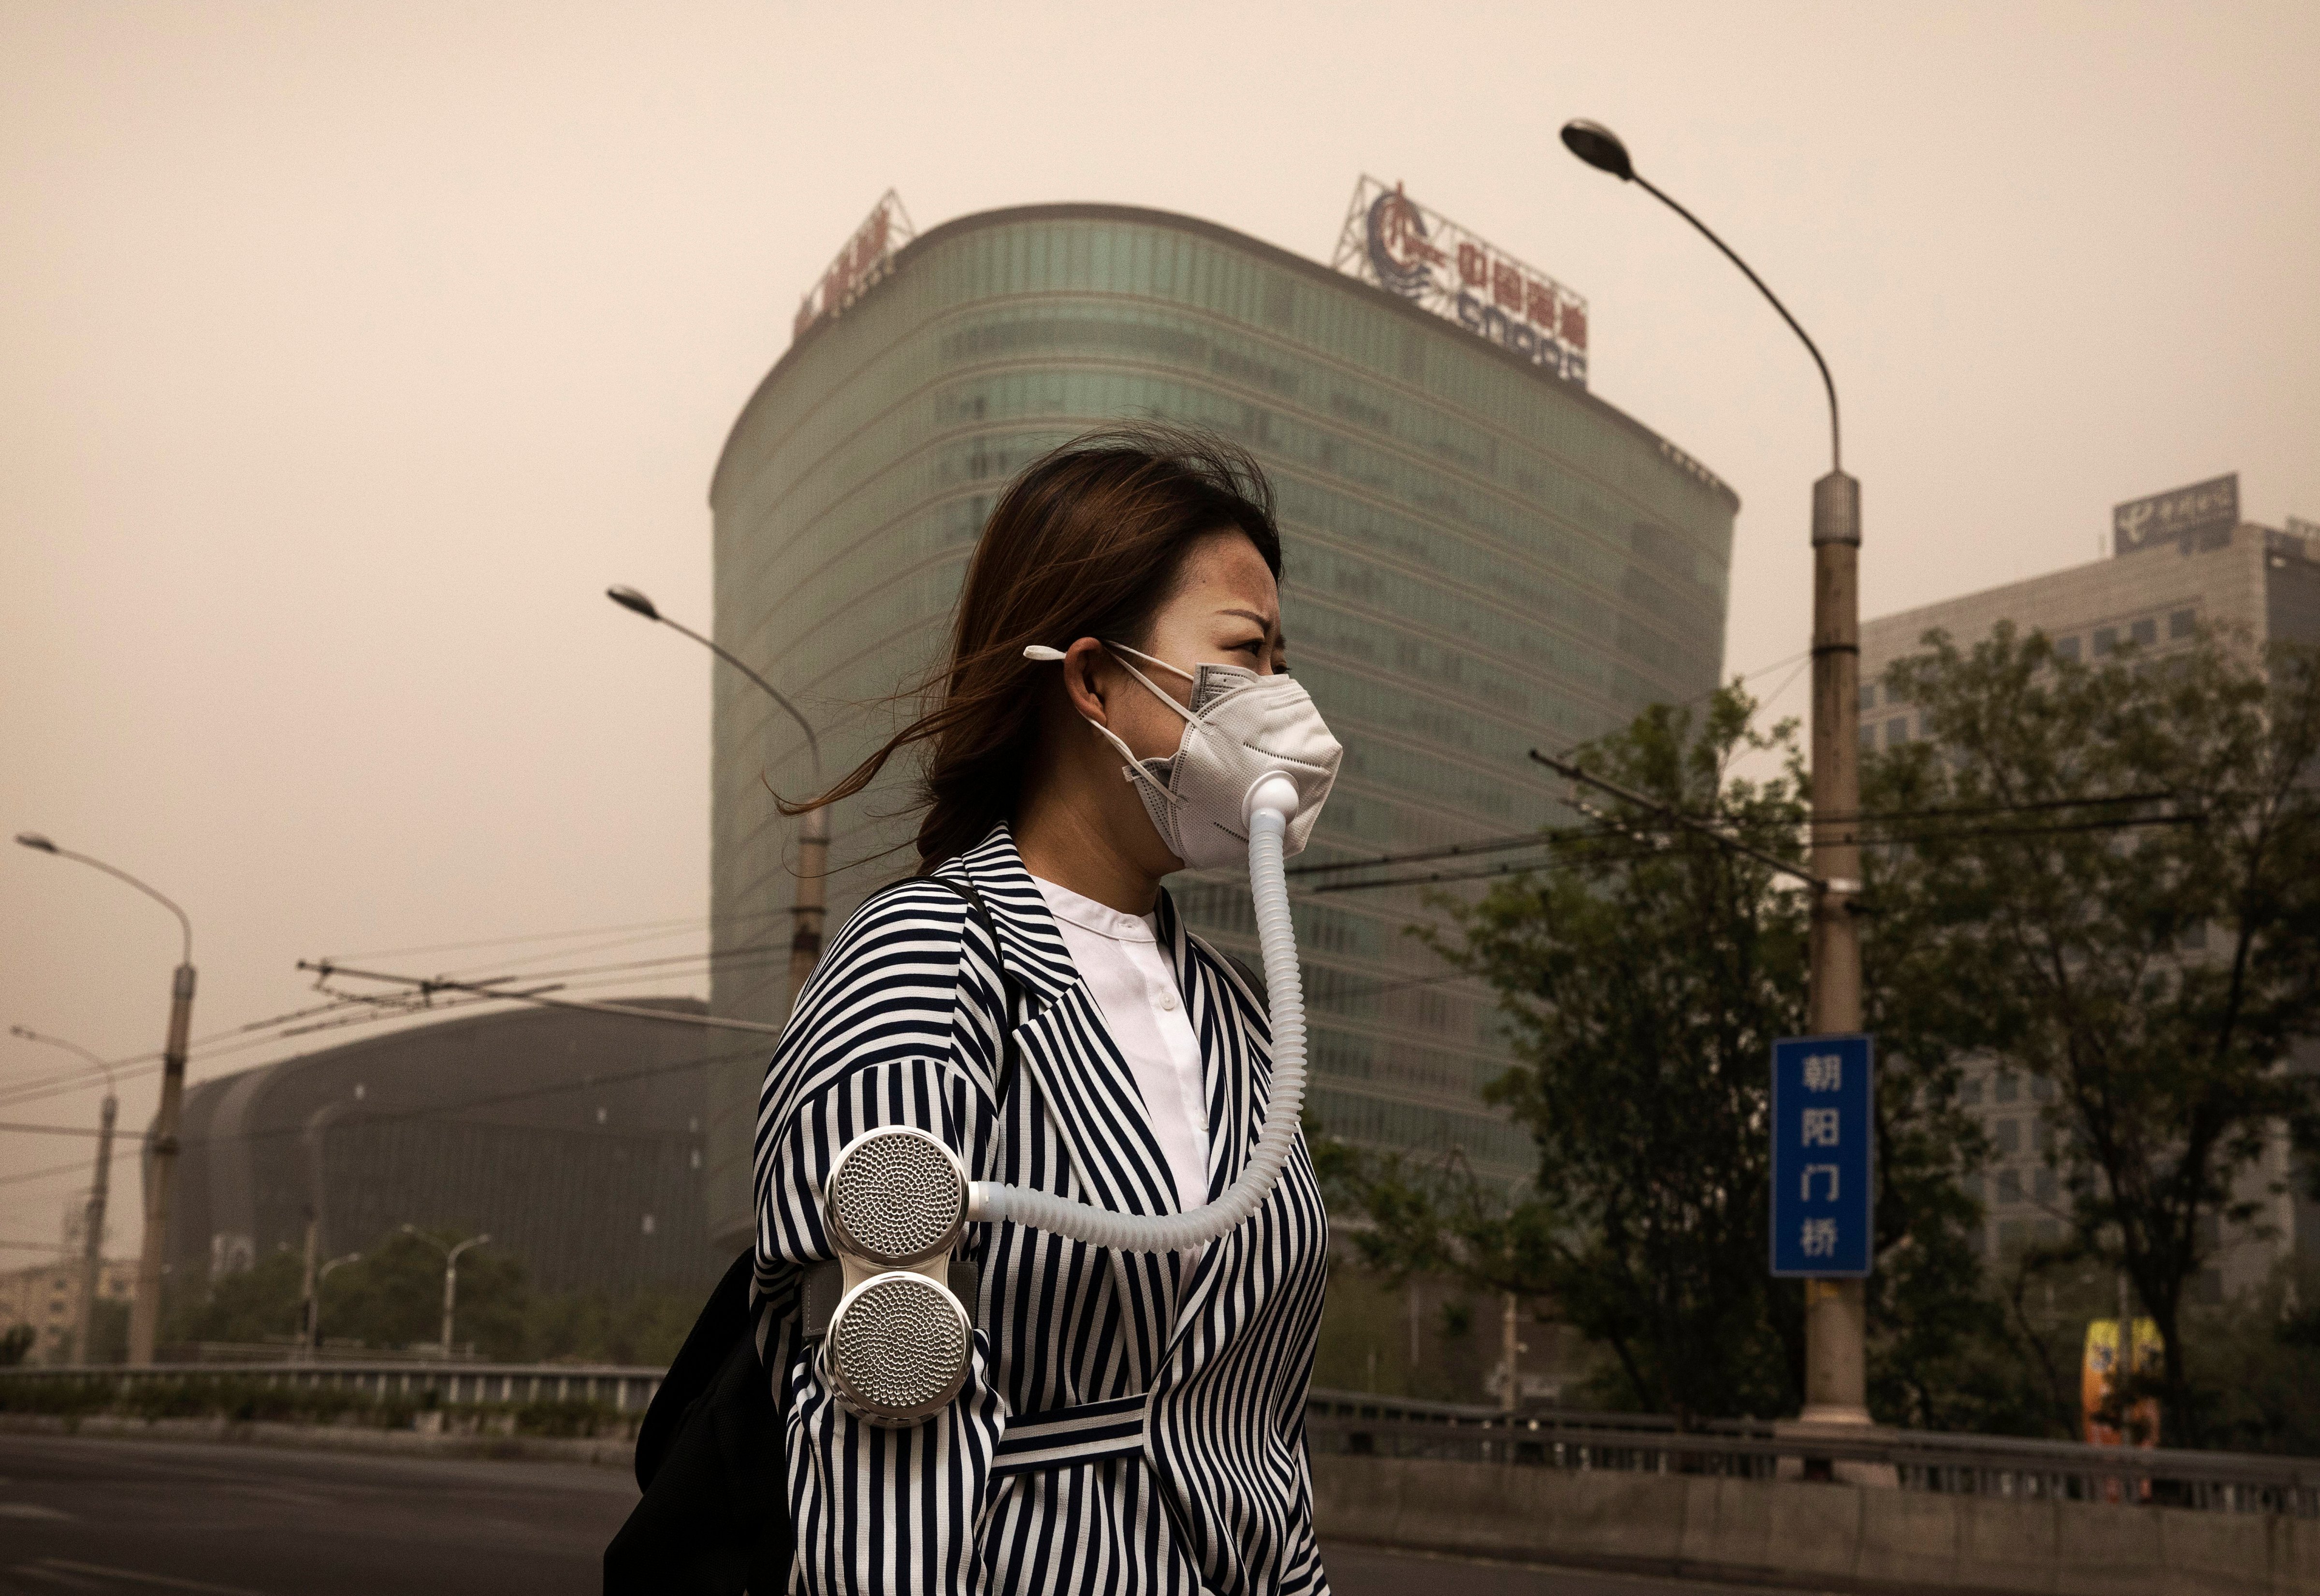 A Chinese woman wears a mask to protect from particles blown in during a sandstorm as she walks in the street on May 4, 2017 in Beijing, China. (Kevin Frayer—Getty Images)